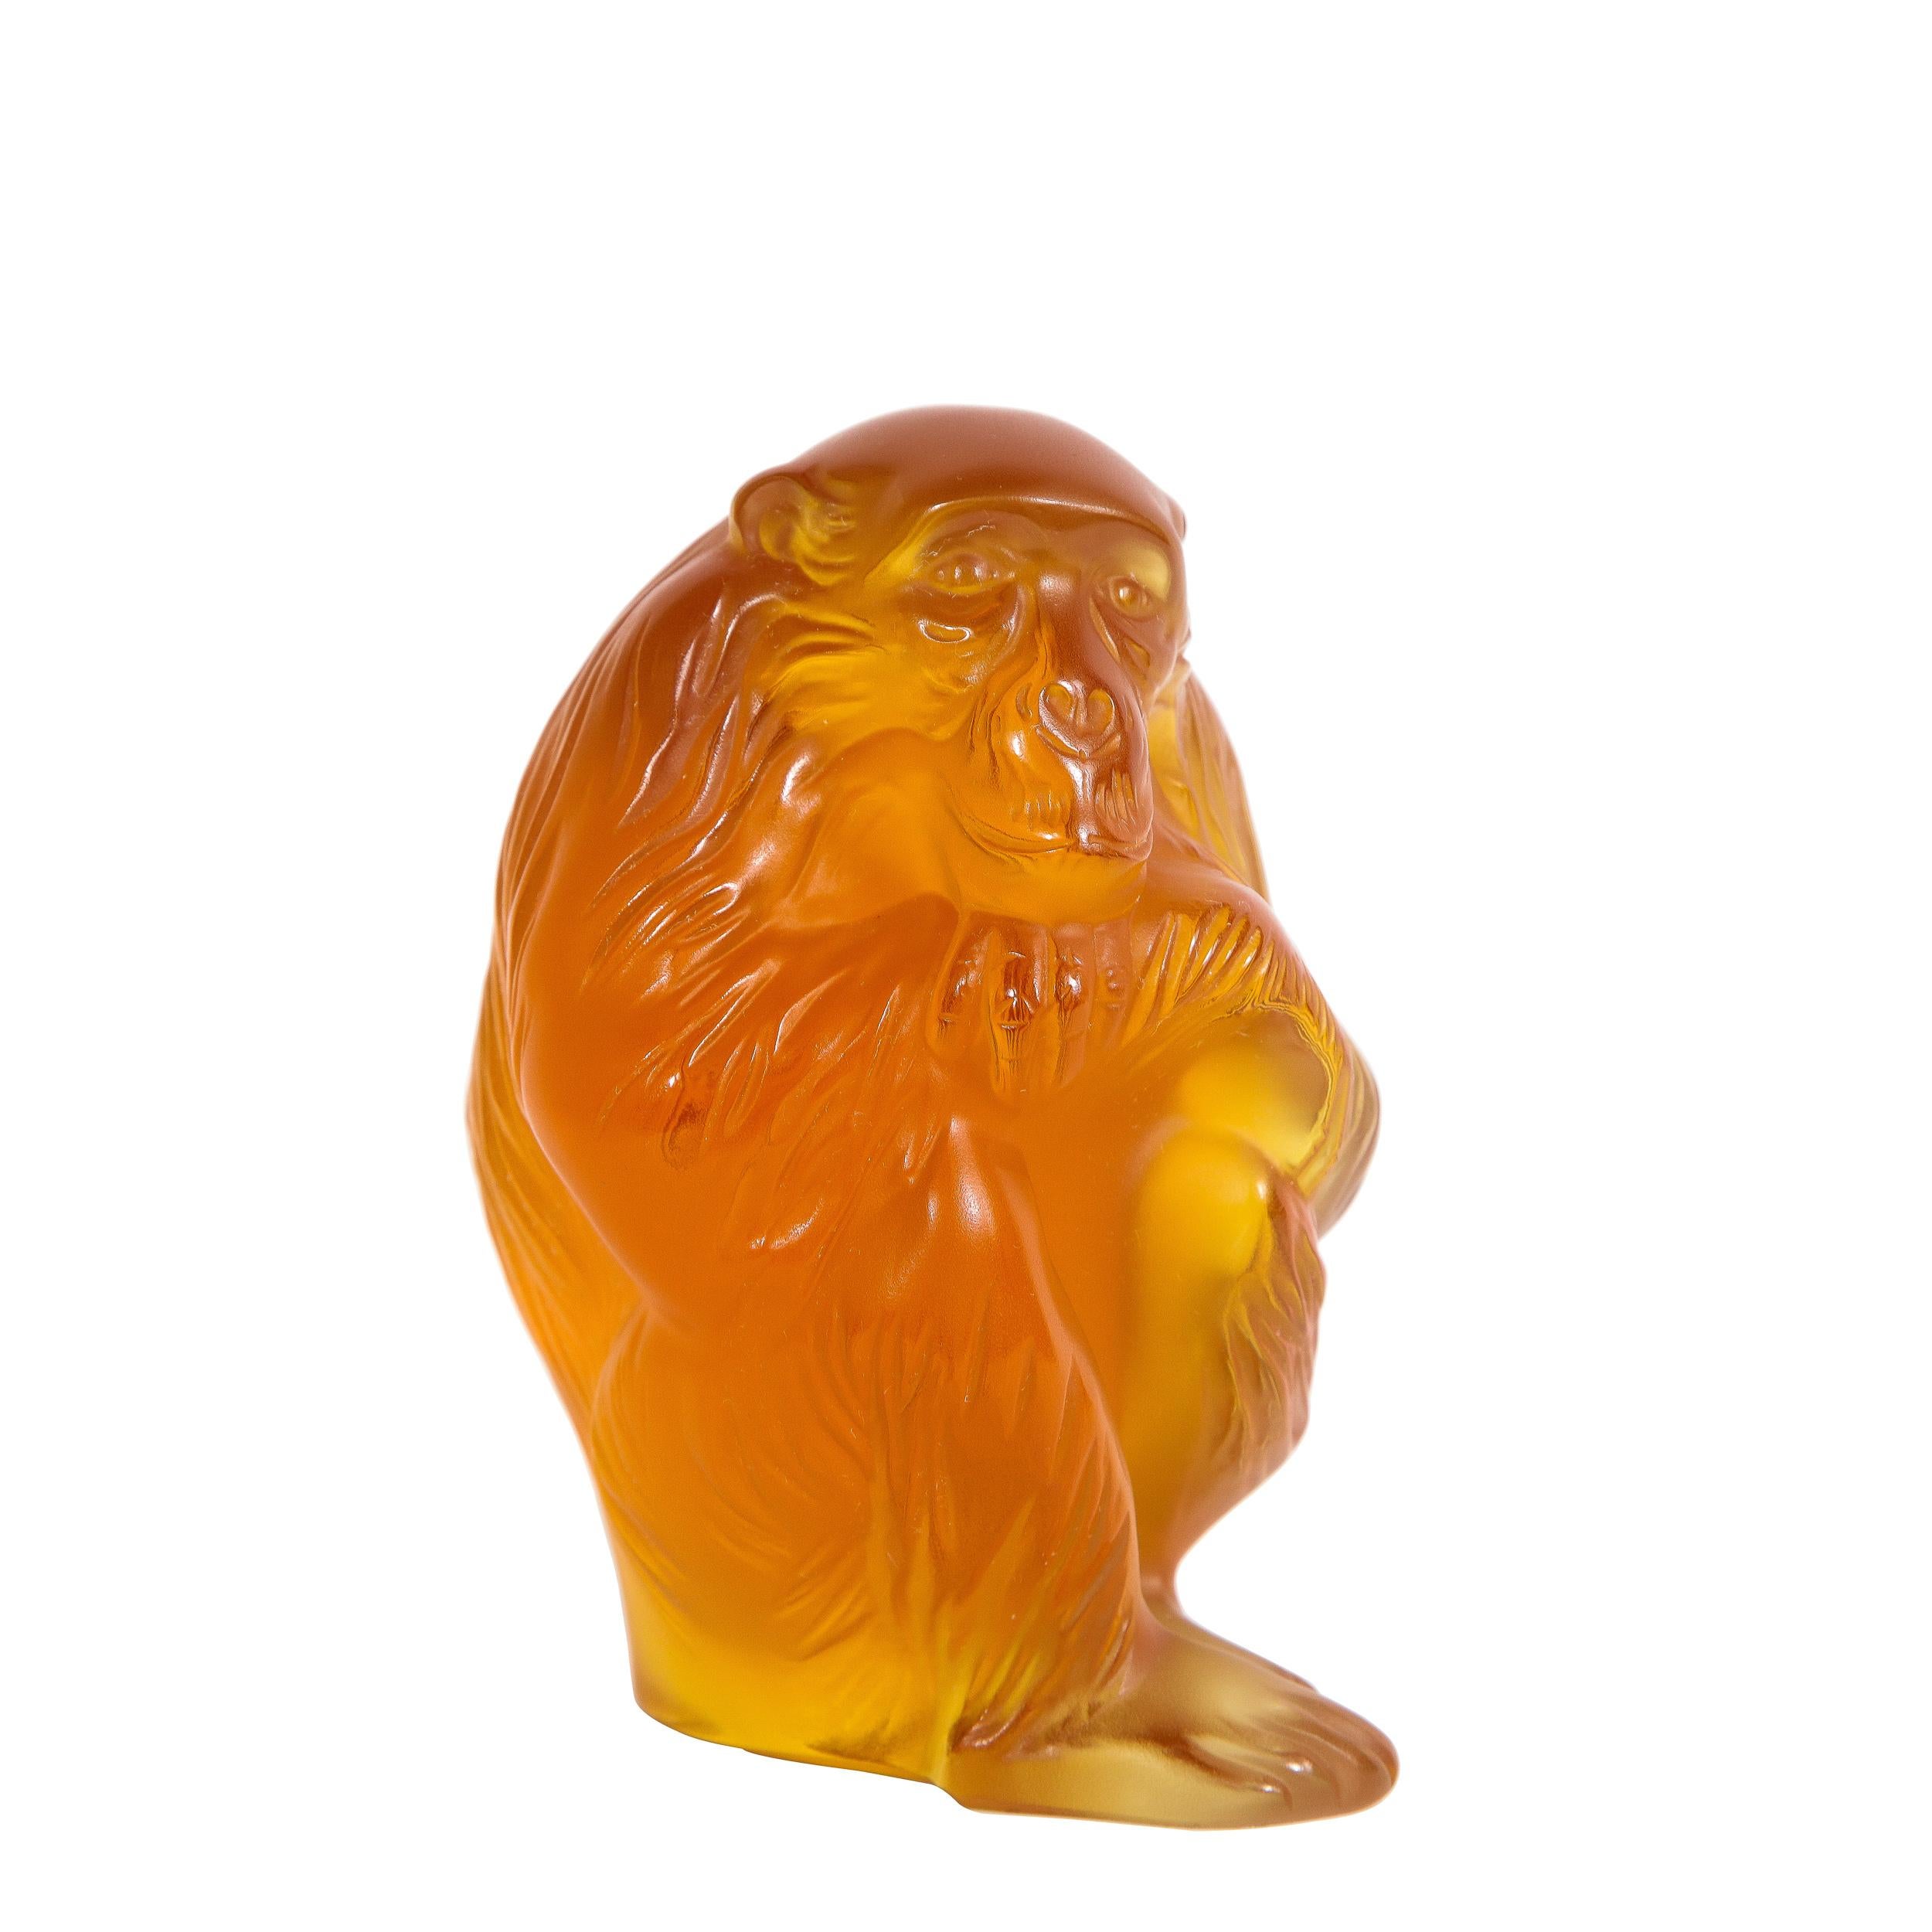 This elegant modernist decorative object was realized in France by the celebrated maker Lalique. It features figurative stylized crouching monkey figurine in carnelian glass. With its beautiful craftsmanship by one of France's great luxury glass